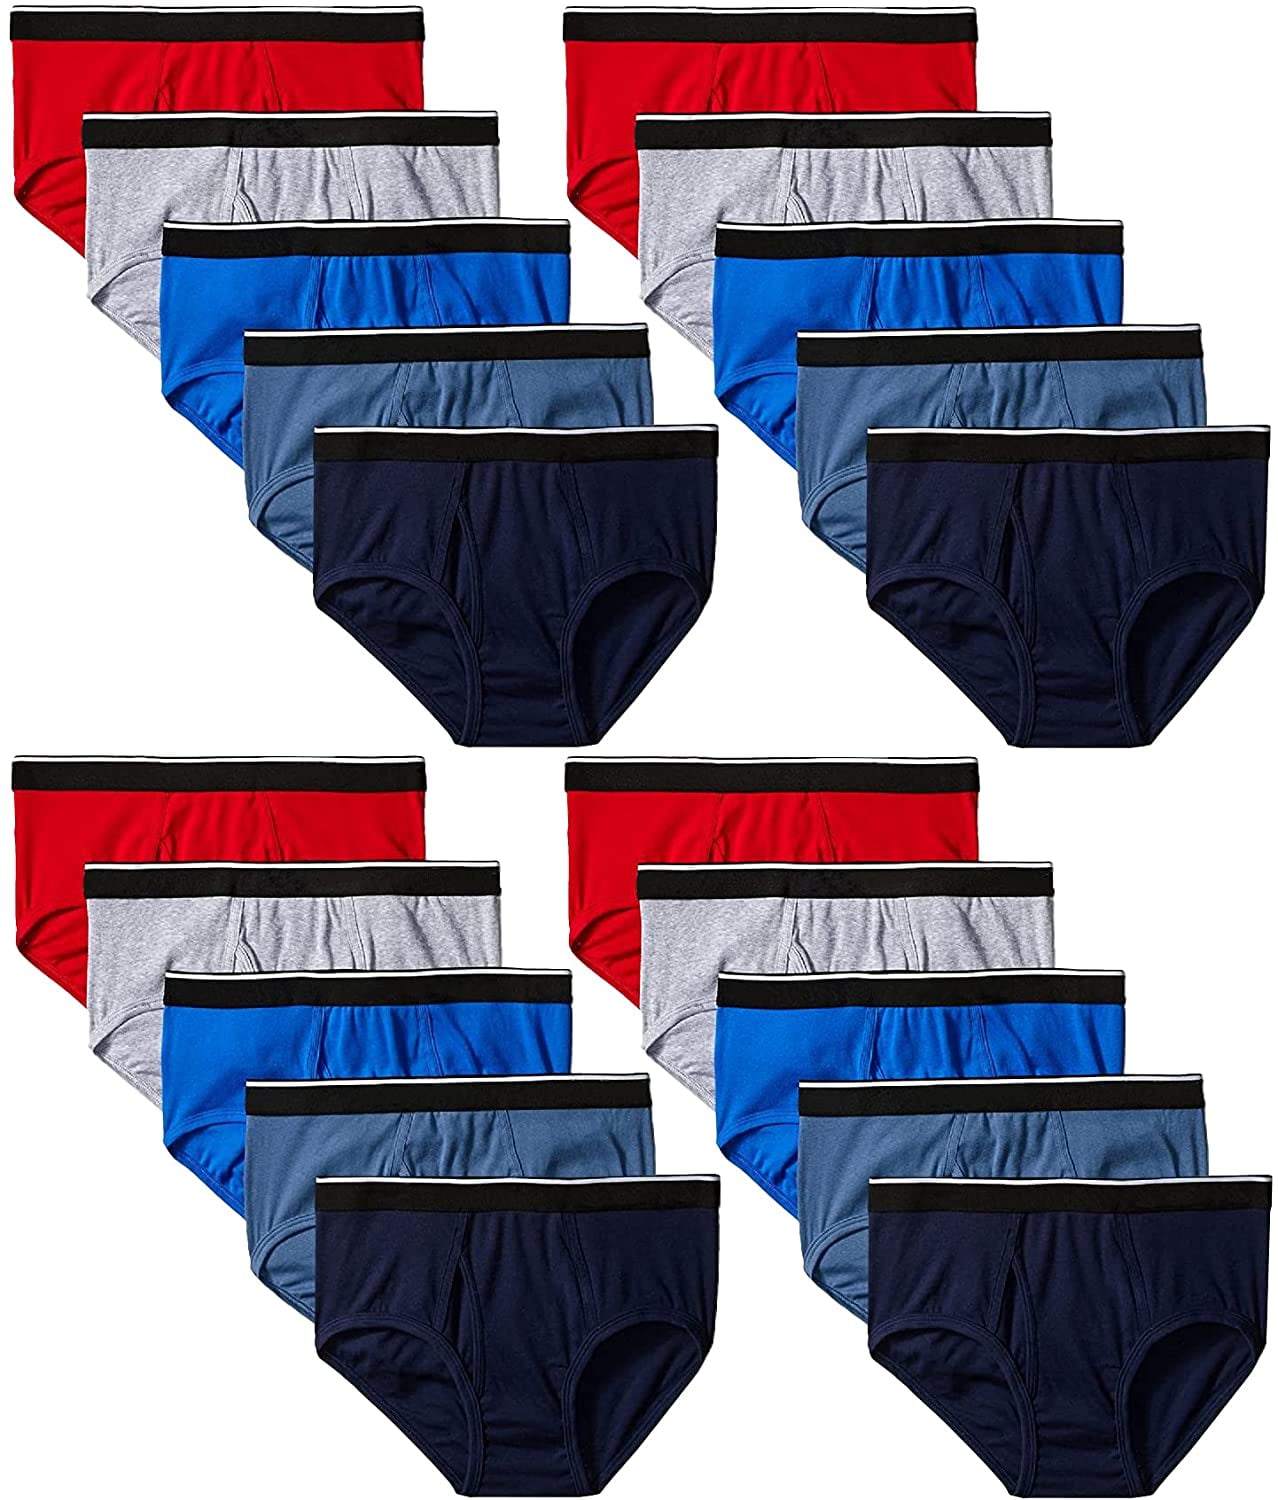 Buy Dollar Dollar Men Pack Of 3 Assorted Cotton Basic Briefs at Redfynd